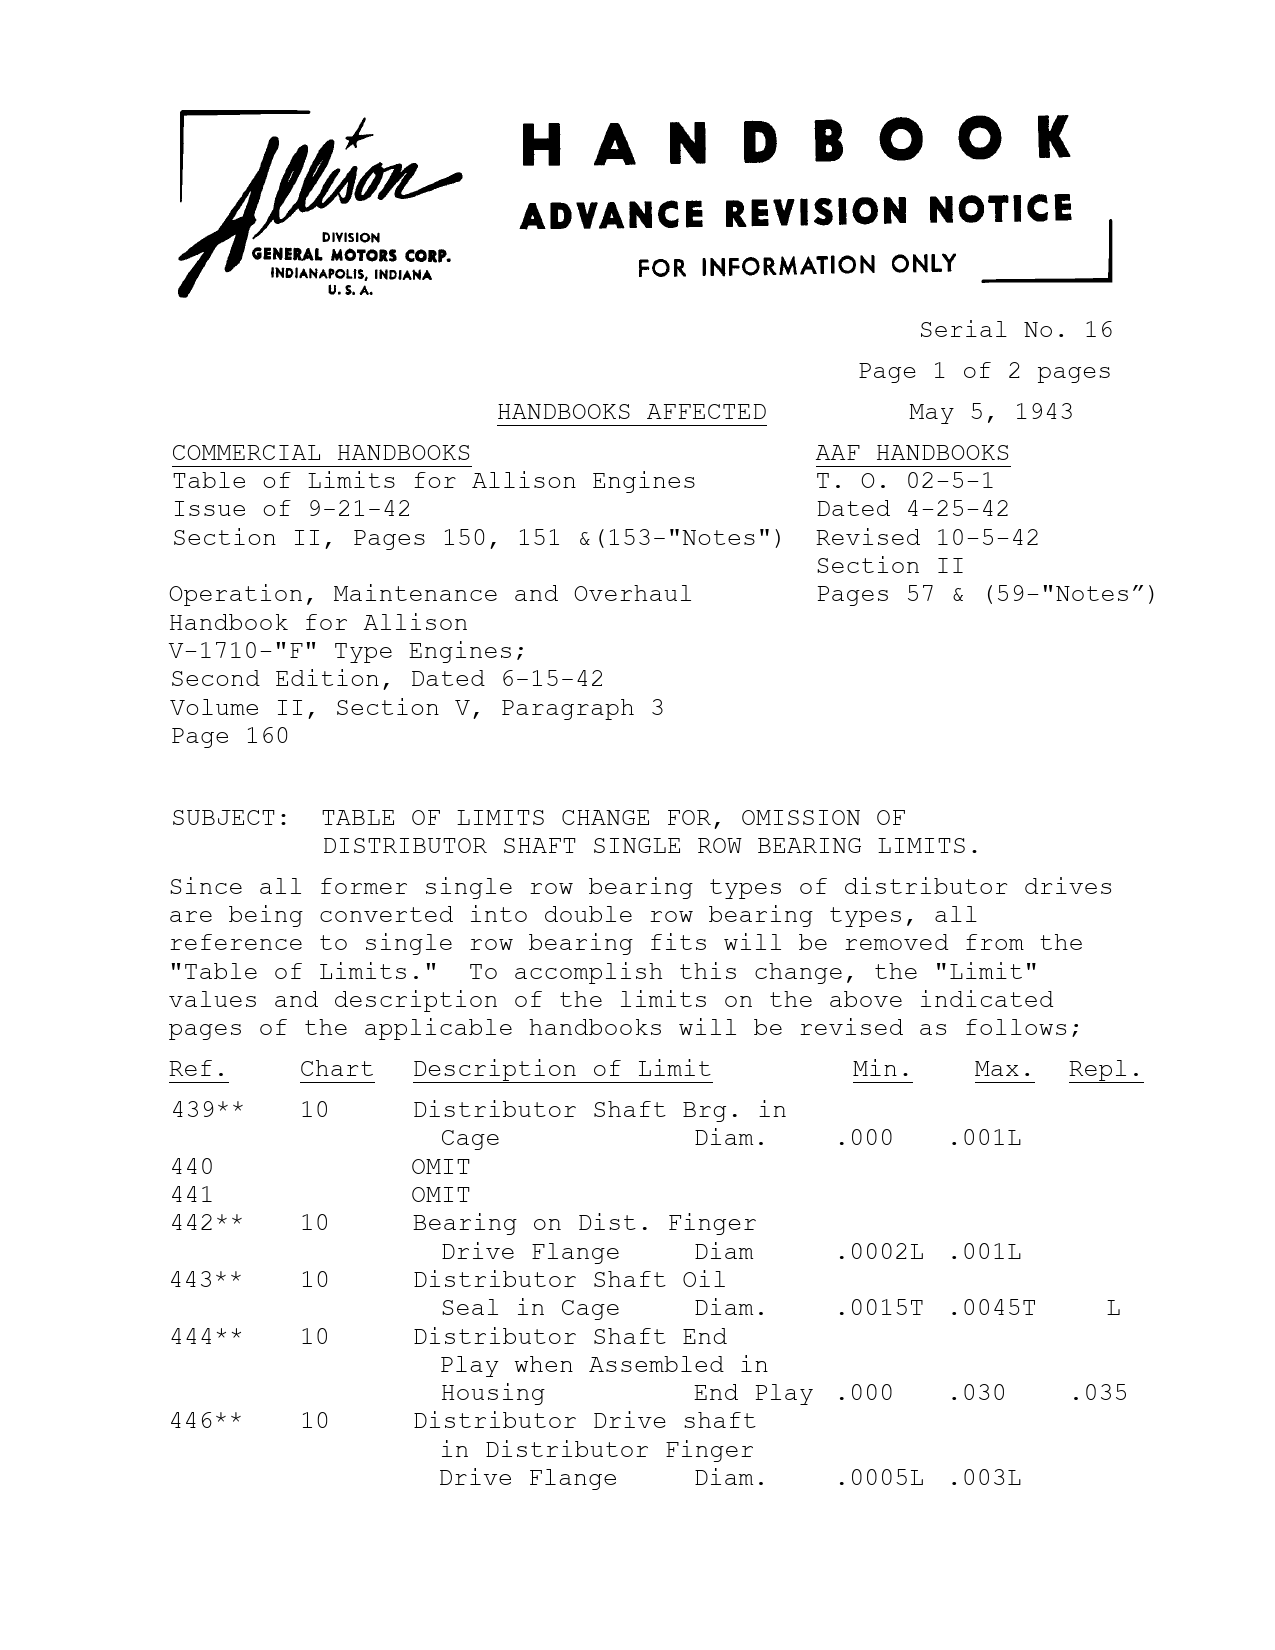 Sample page 1 from AirCorps Library document: Table of Limits Change, Omission of Distributor Shaft Single Row Bearing Limits